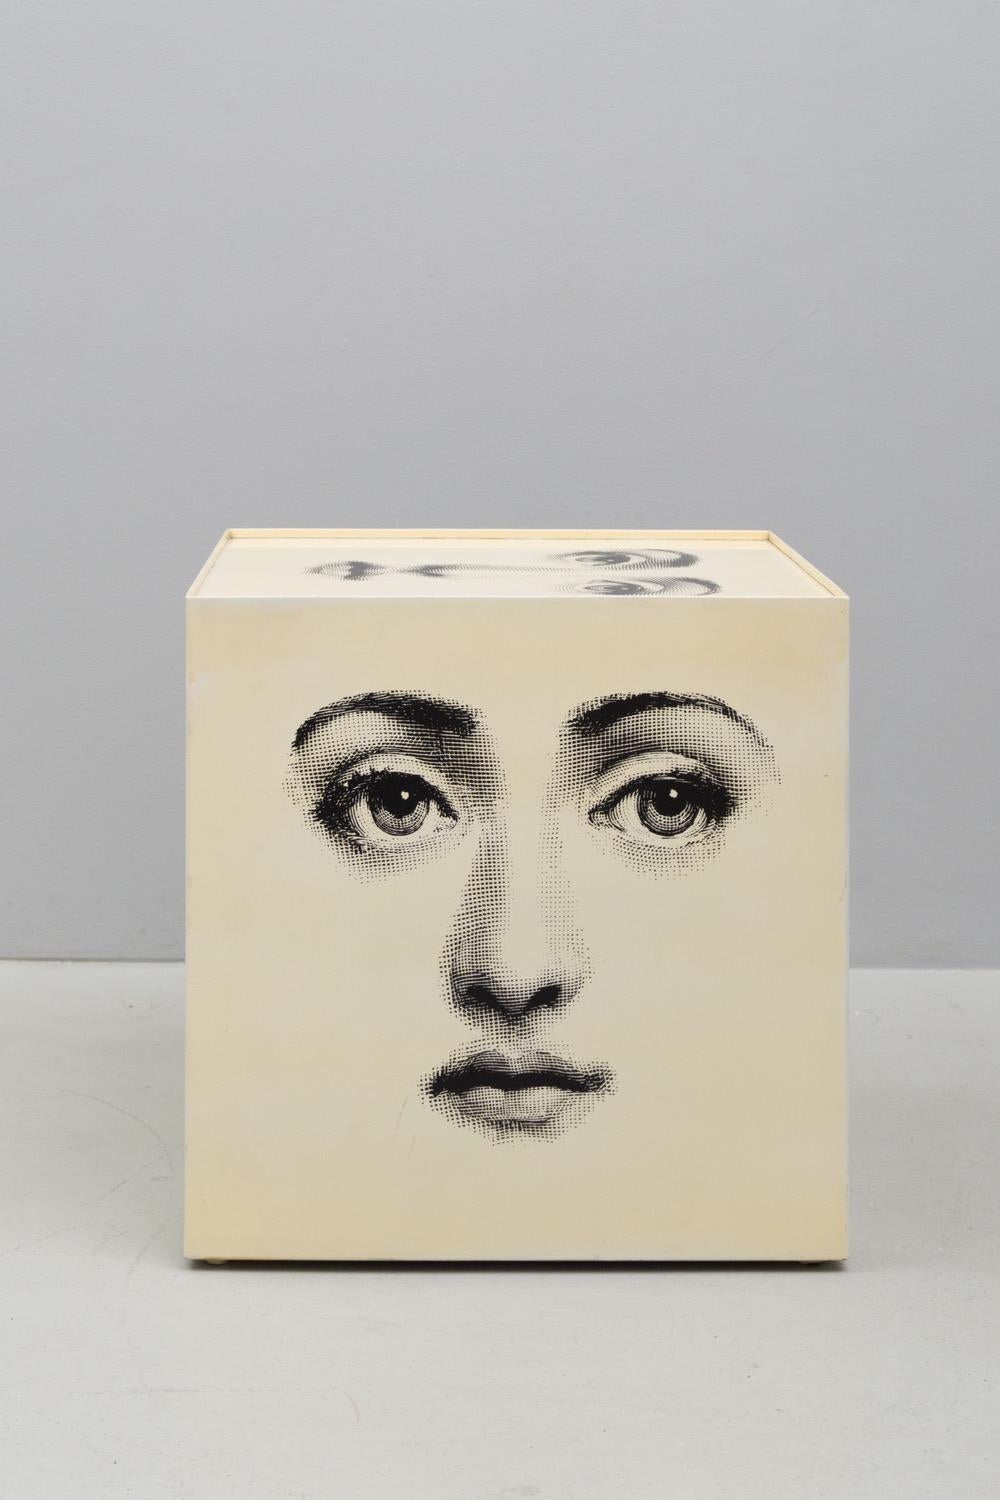 Modern Low, Cubic Table by Fornasetti, 1955